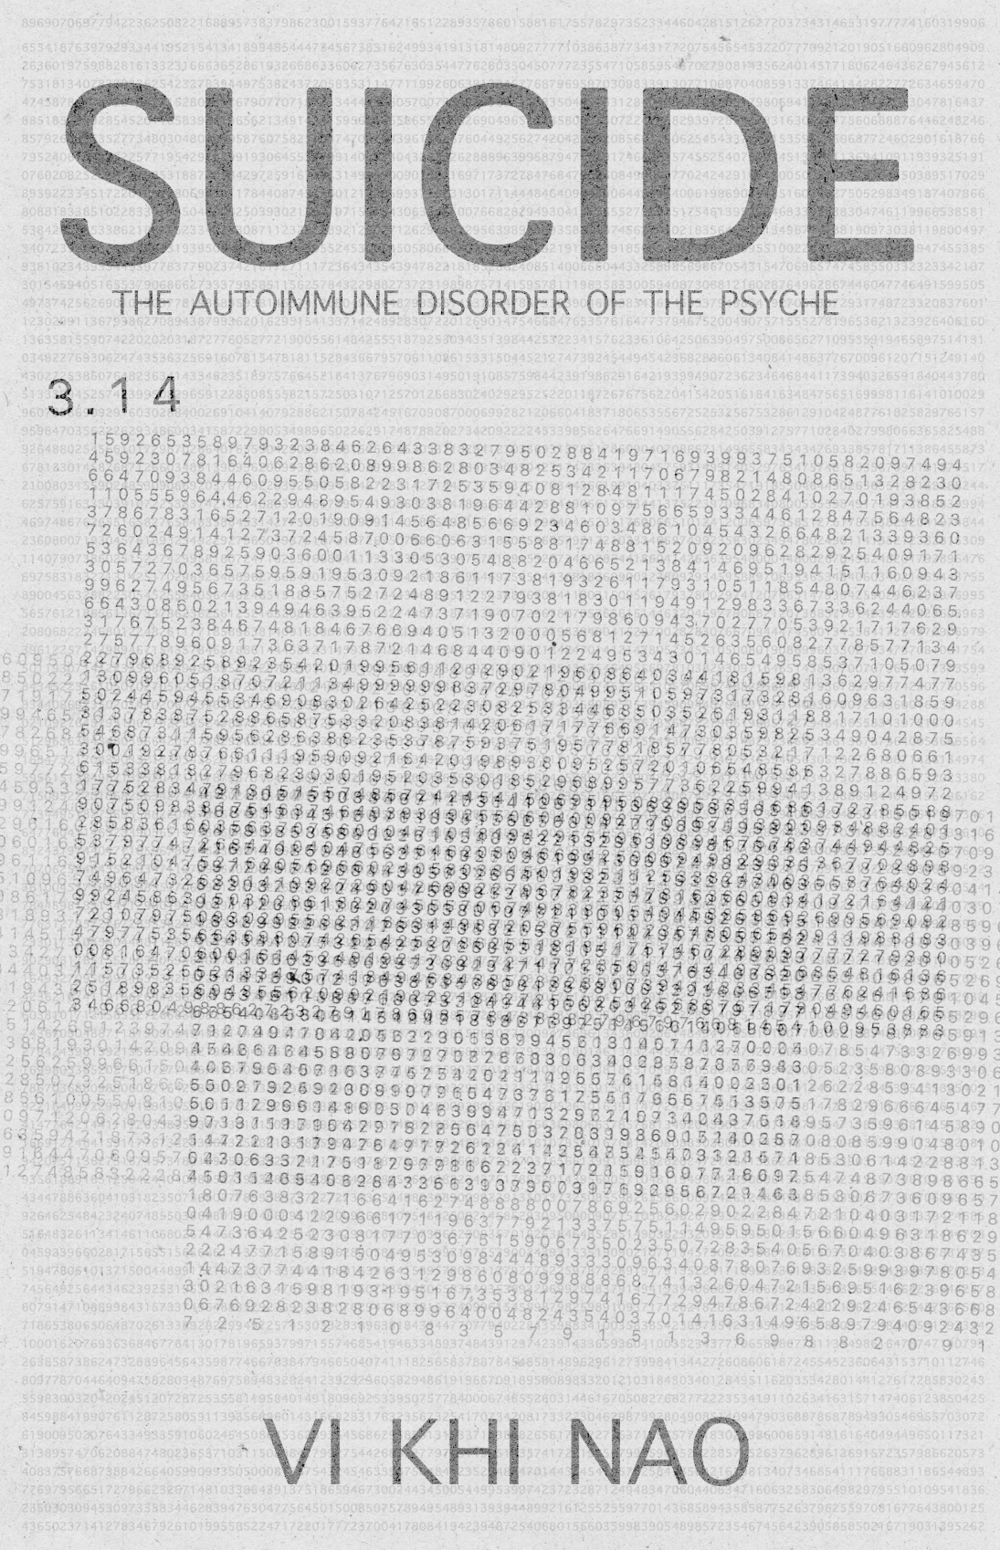 Suicide: The Autoimmune Disorder of the Psyche by Vi Khi Nao [OUT NOW!]